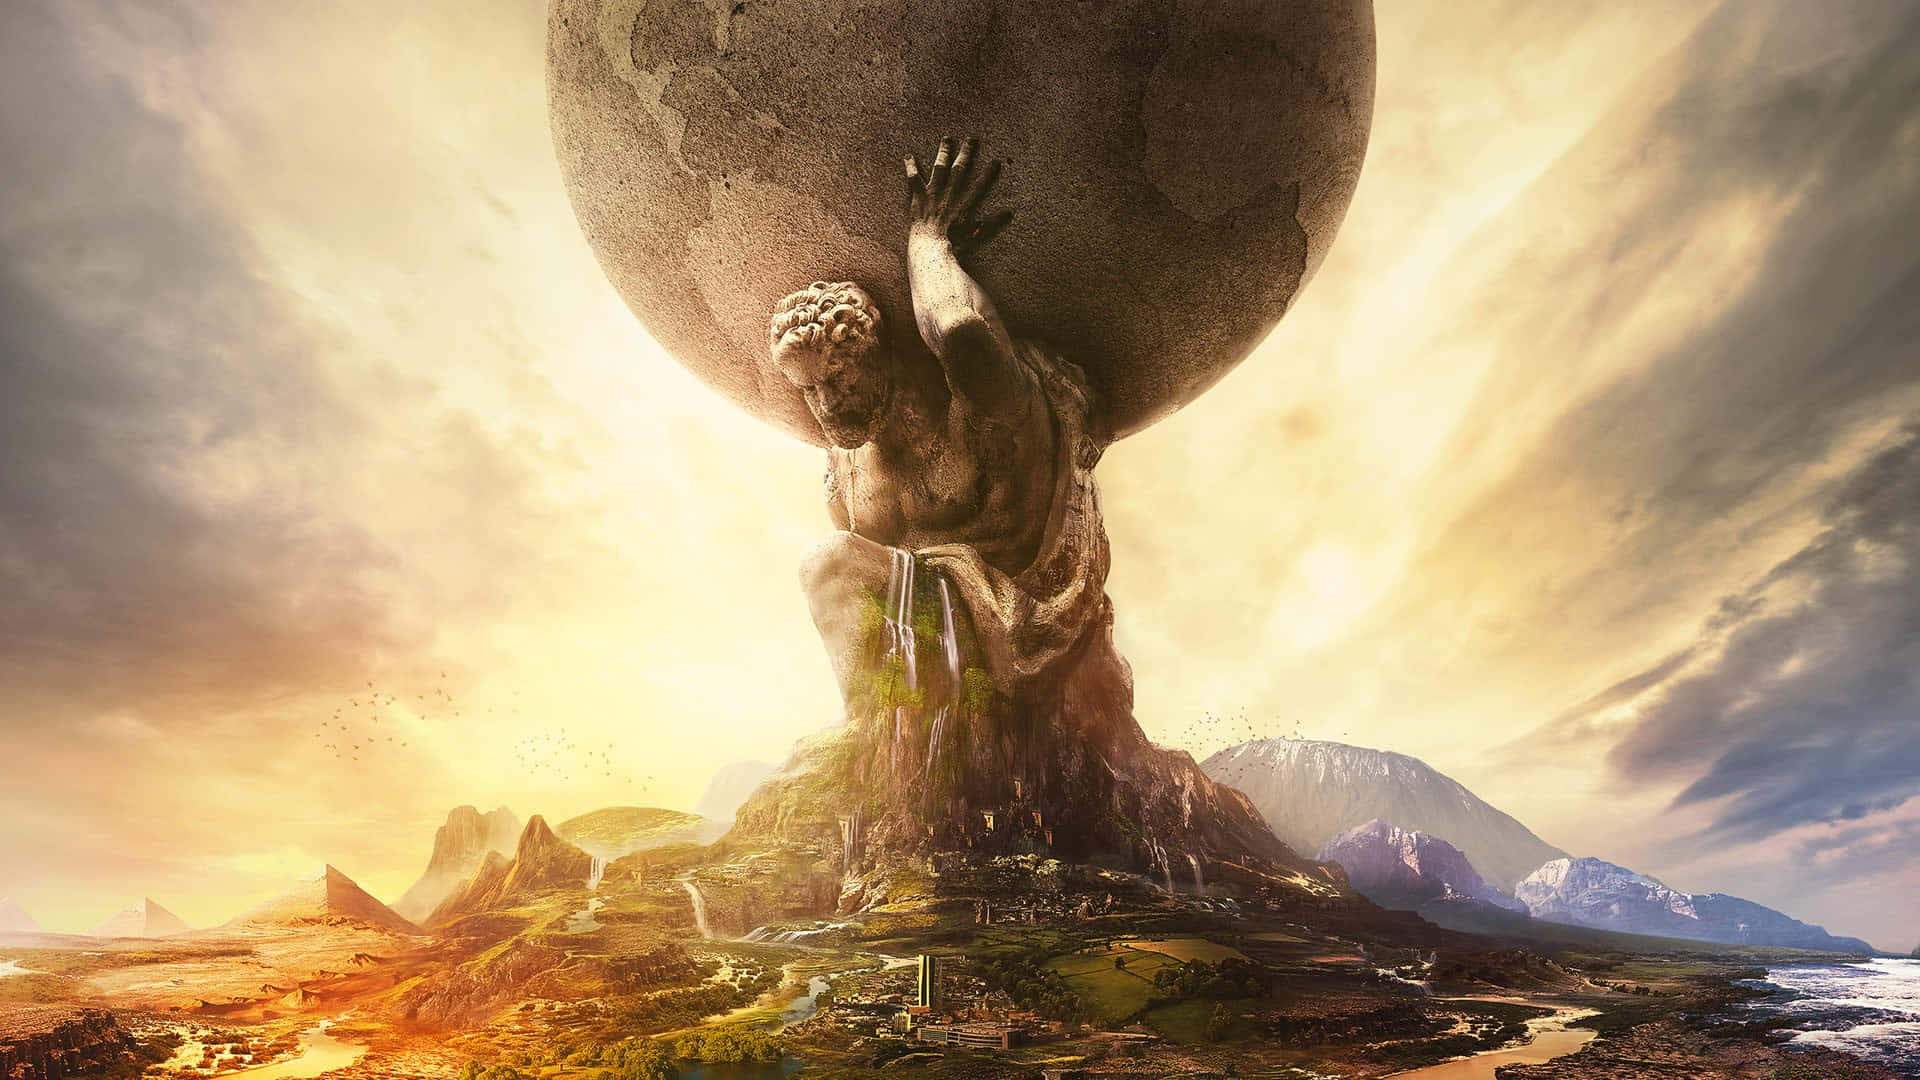 Dominate the World with the Strategy Game "Civilization V"